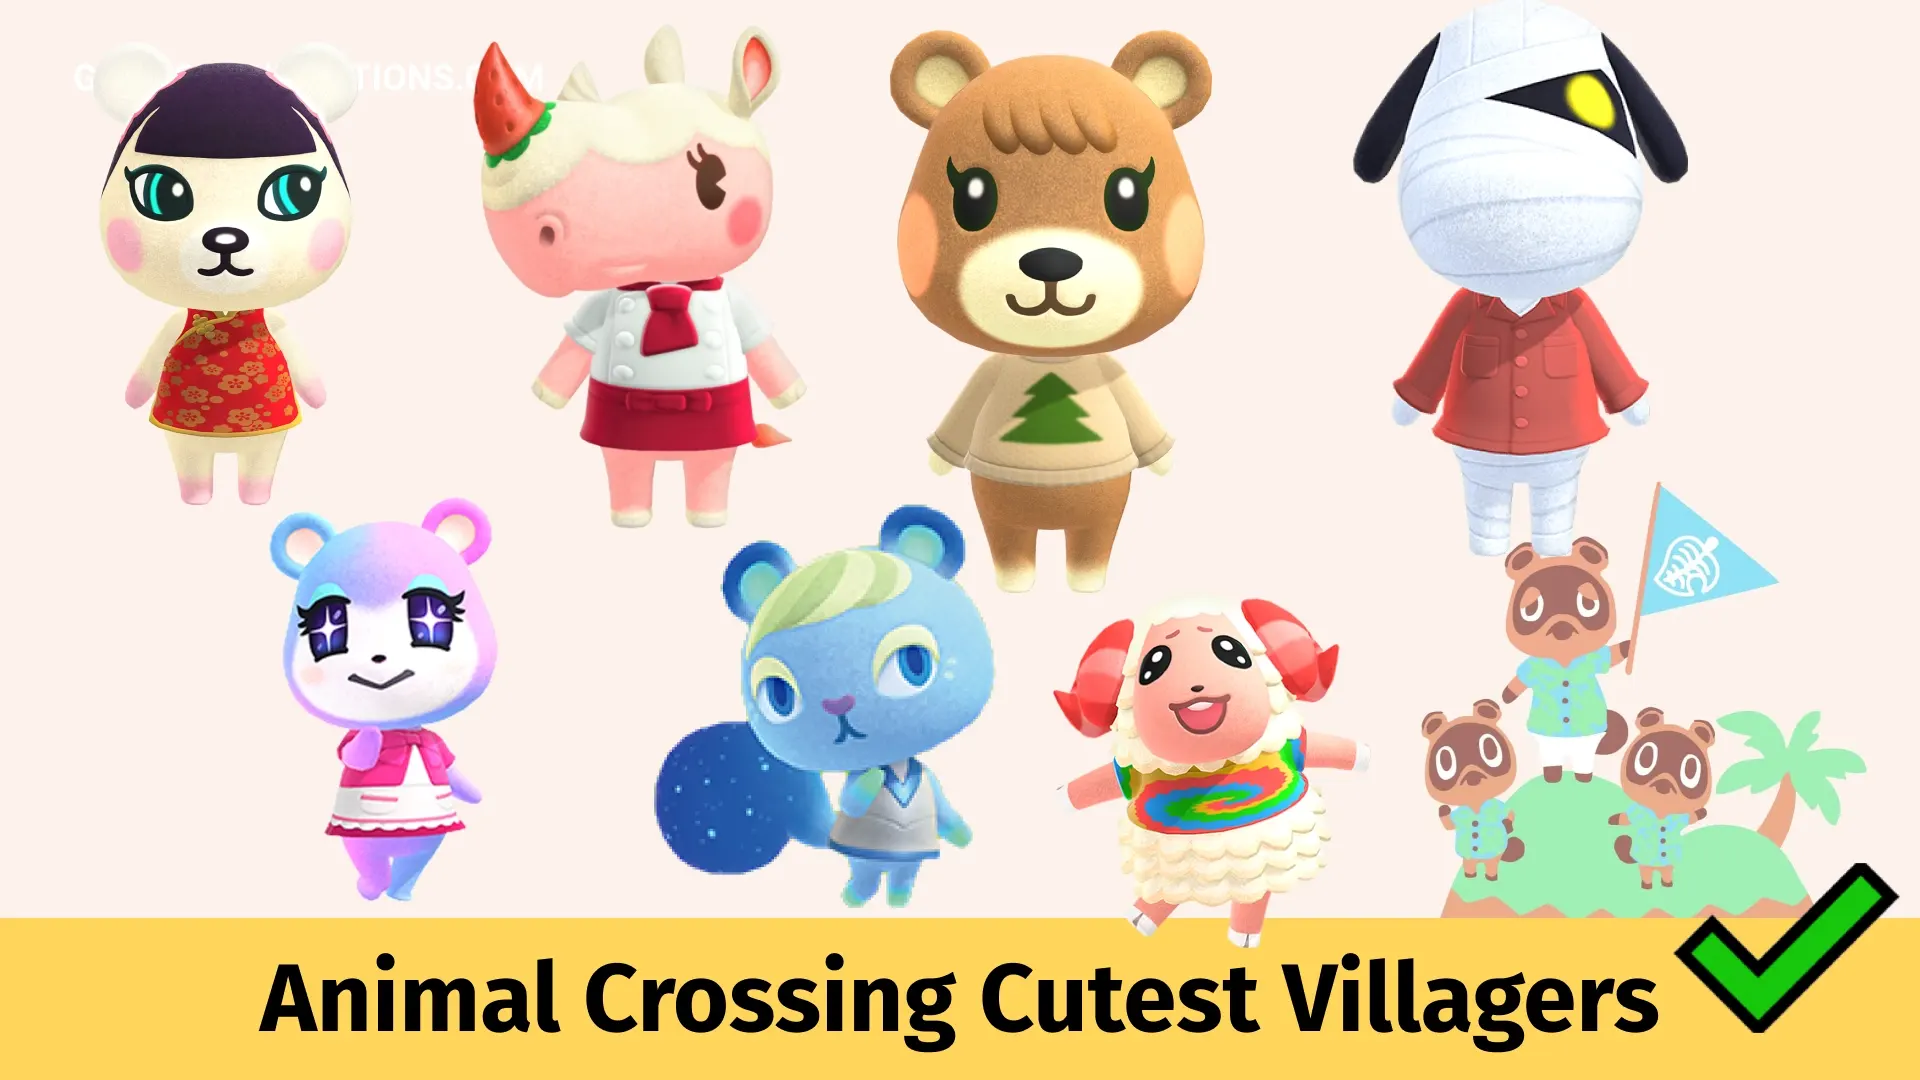 33 Animal Crossing Cutest Villagers To Melt Your Heart - Game Specifications